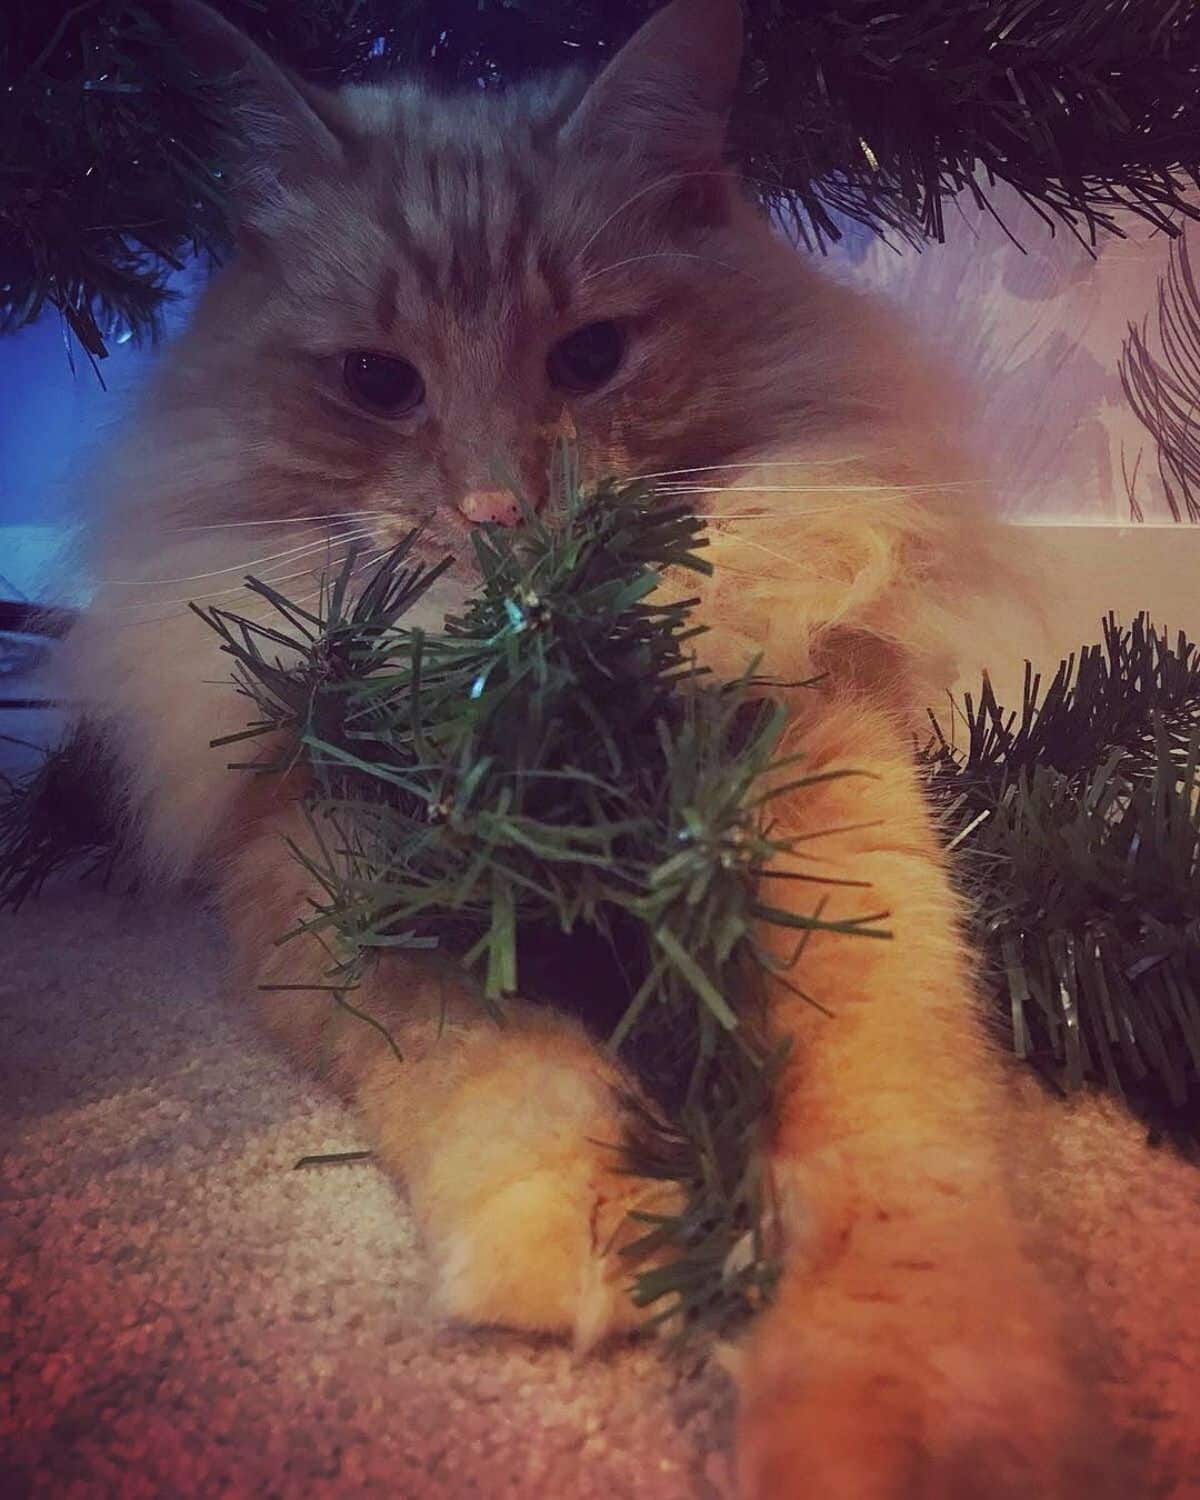 An adorable ginger maine coon lying near a christmas tree and holding a branch.